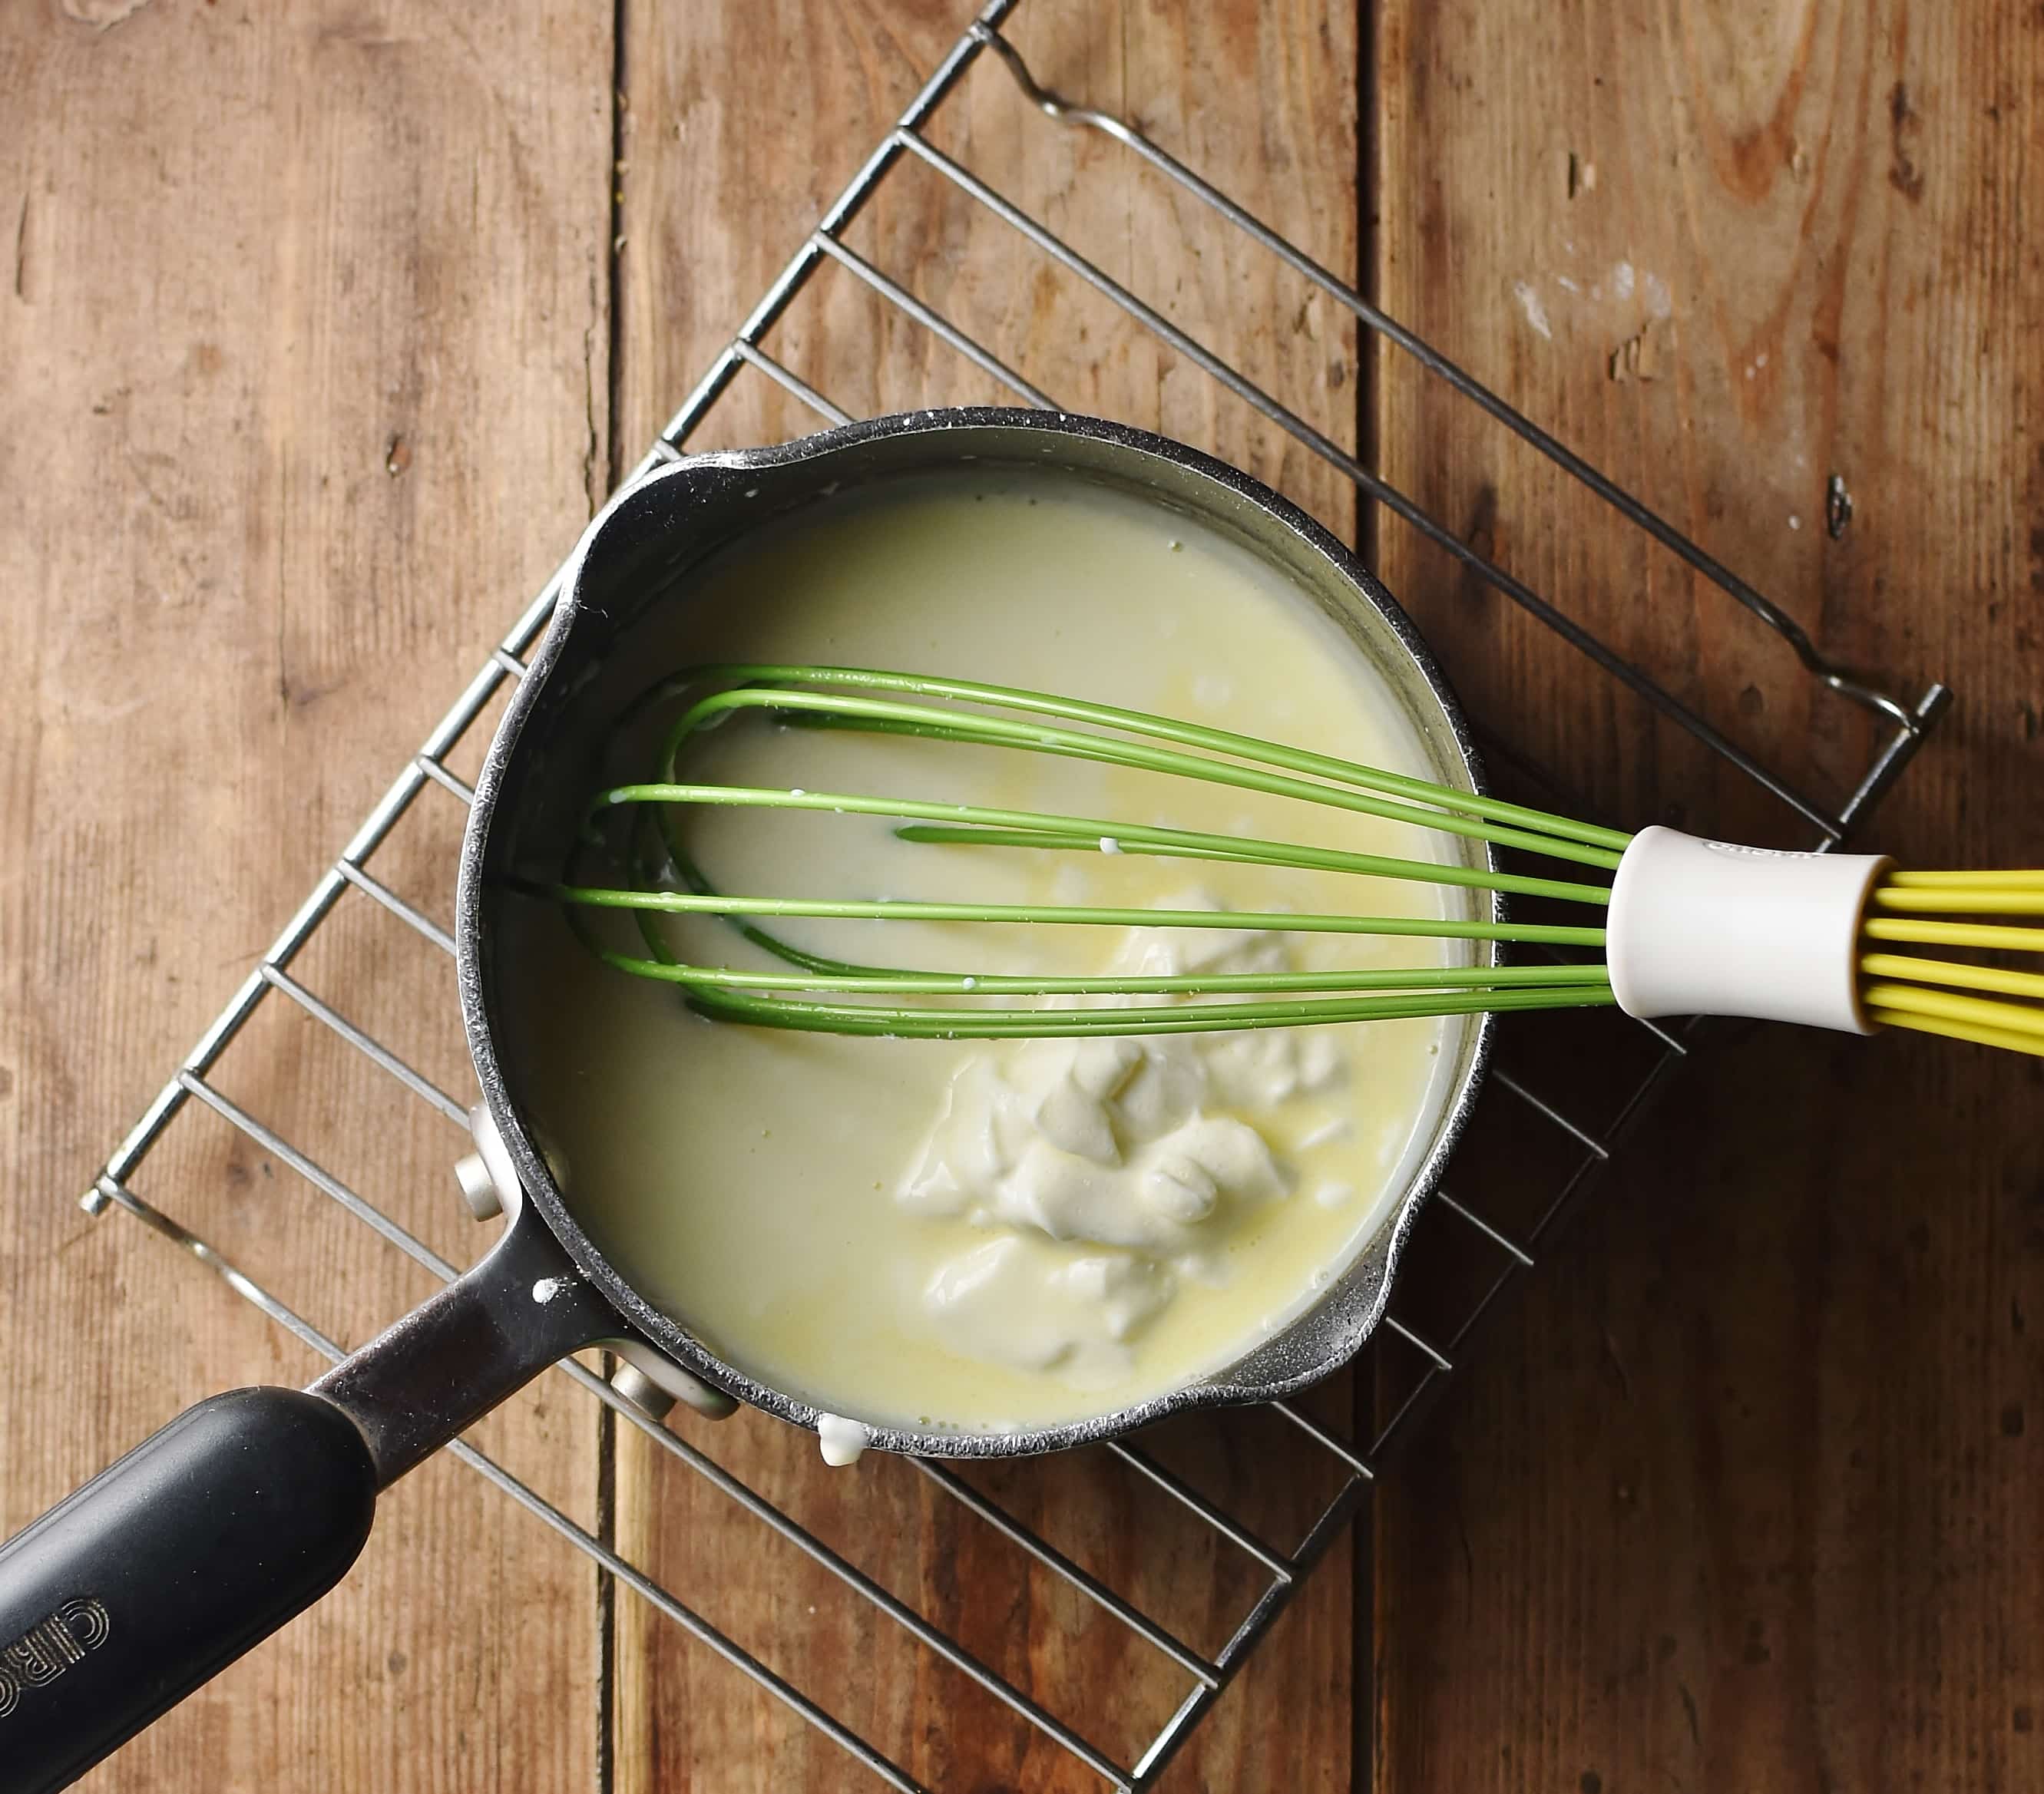 White sauce with yogurt and green whisk in saucepan.